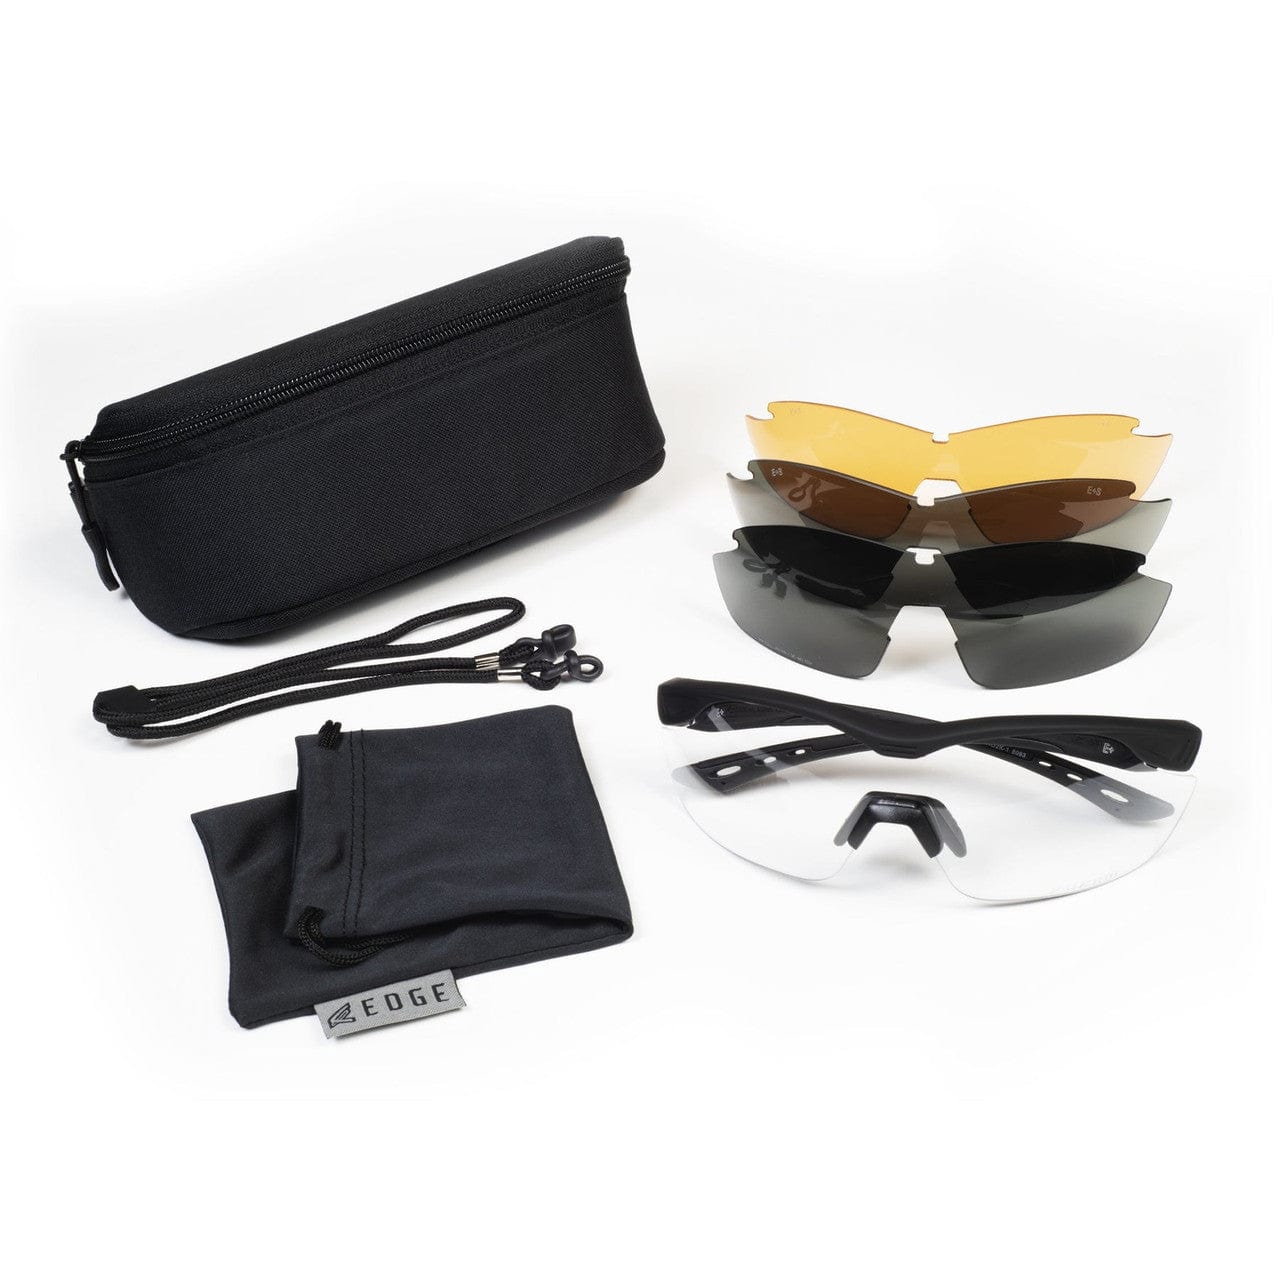 Edge Tactical Eyewear Overlord Safety Glasses 3-Lens Kit